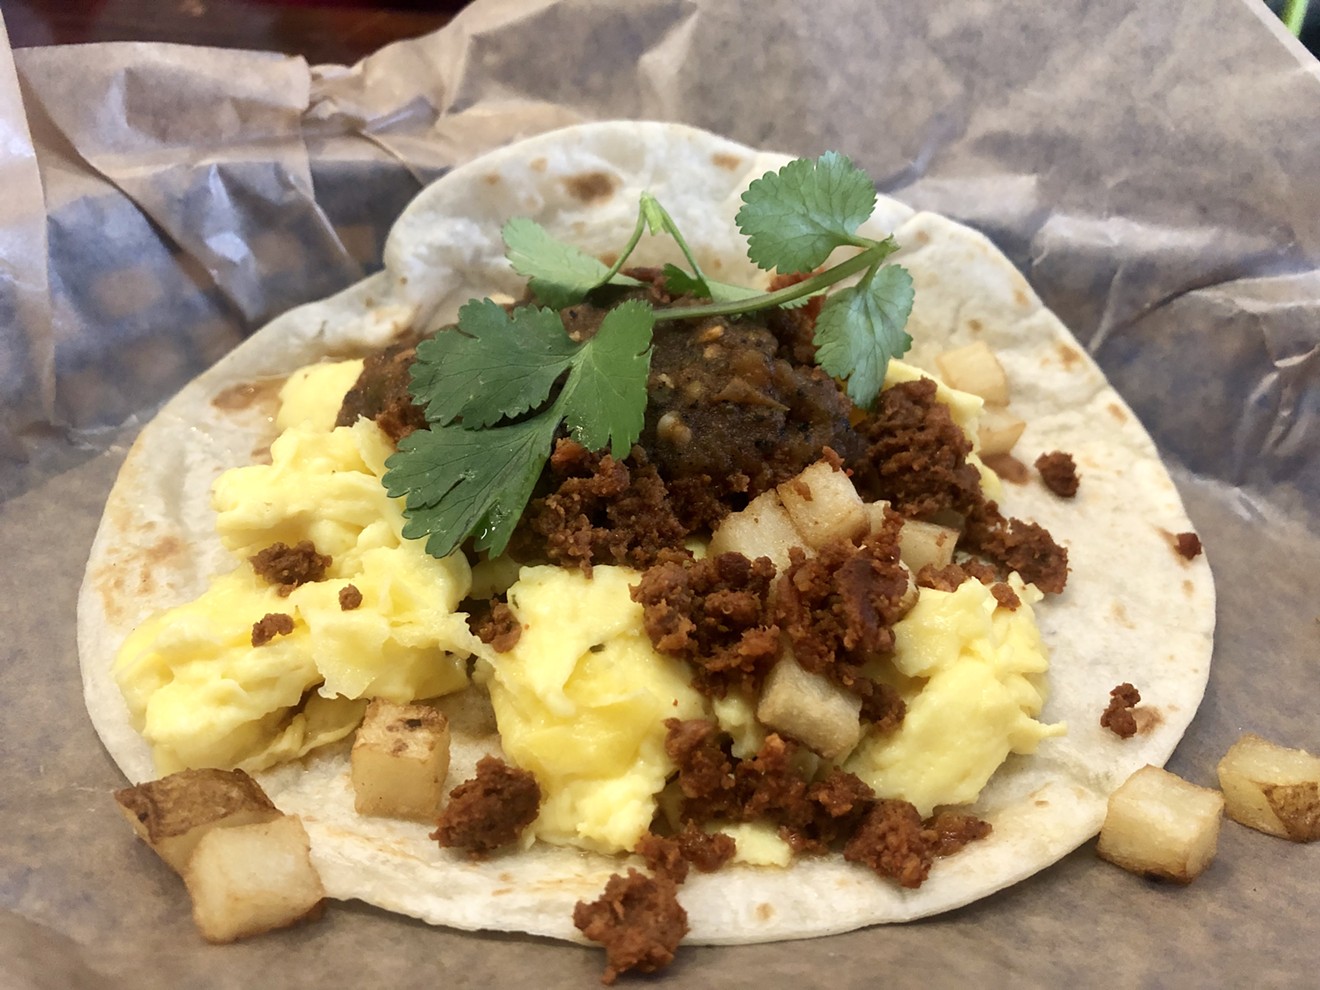 Tacos Mariachi's chorizo breakfast taco. The taqueria's new Lower Greenville location now serves Saturday and Sunday brunch.